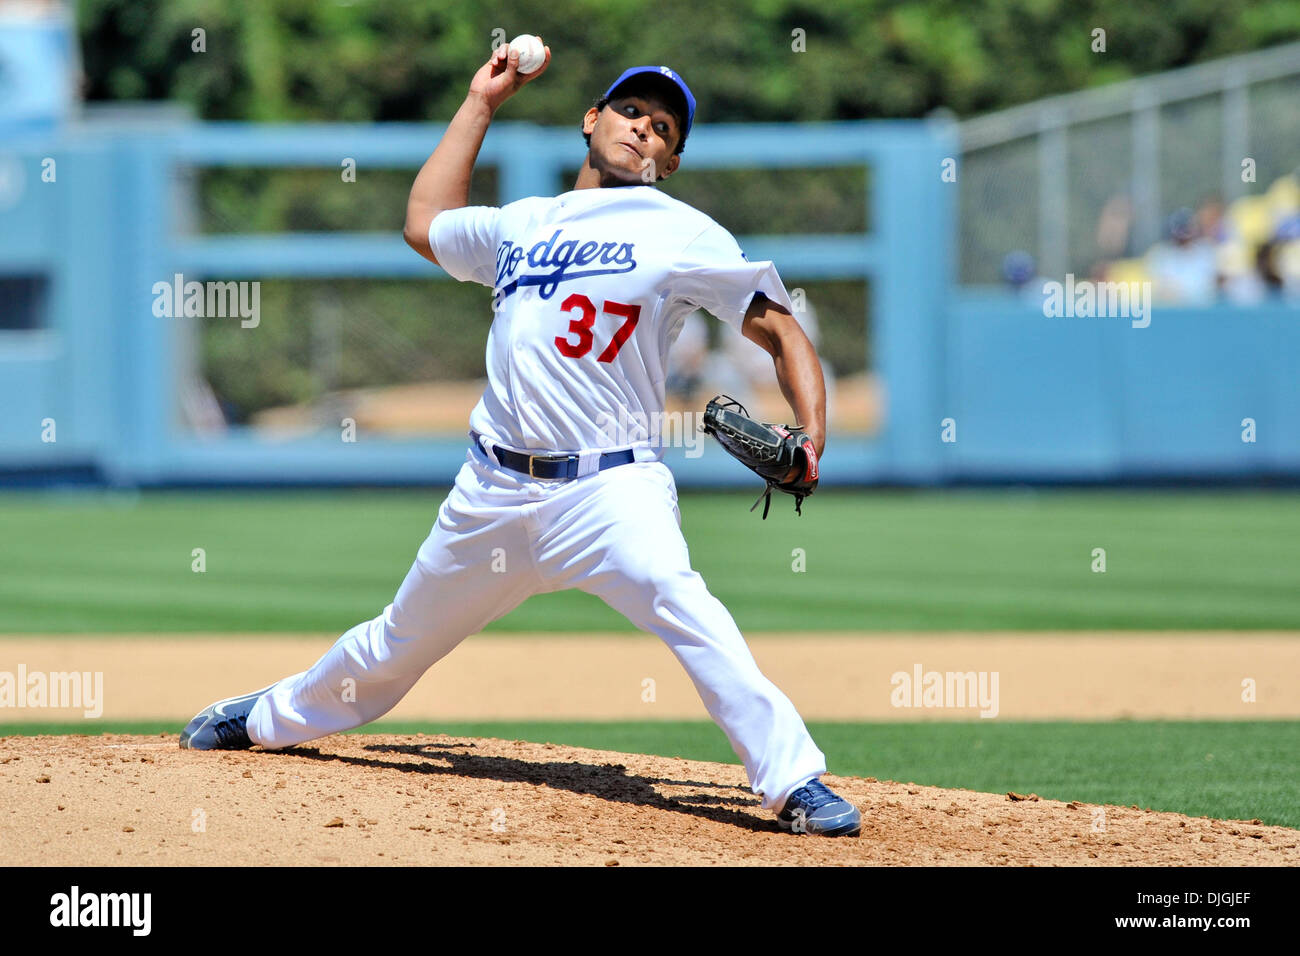 July 24, 2010 - Los Angeles, California, United States of America - 24 July 2010:  Los Angeles Dodgers relief pitcher Carlos Monasterios (37) pitches agains the Mets. The New York Mets lost to the Los Angeles Dodgers  3-2 in 13 innings on a James Loney walkoff homerun at Dodger Stadium in Los Angeles,. California..Mandatory Credit: Andrew Fielding / Southcreek Global (Credit Image: Stock Photo